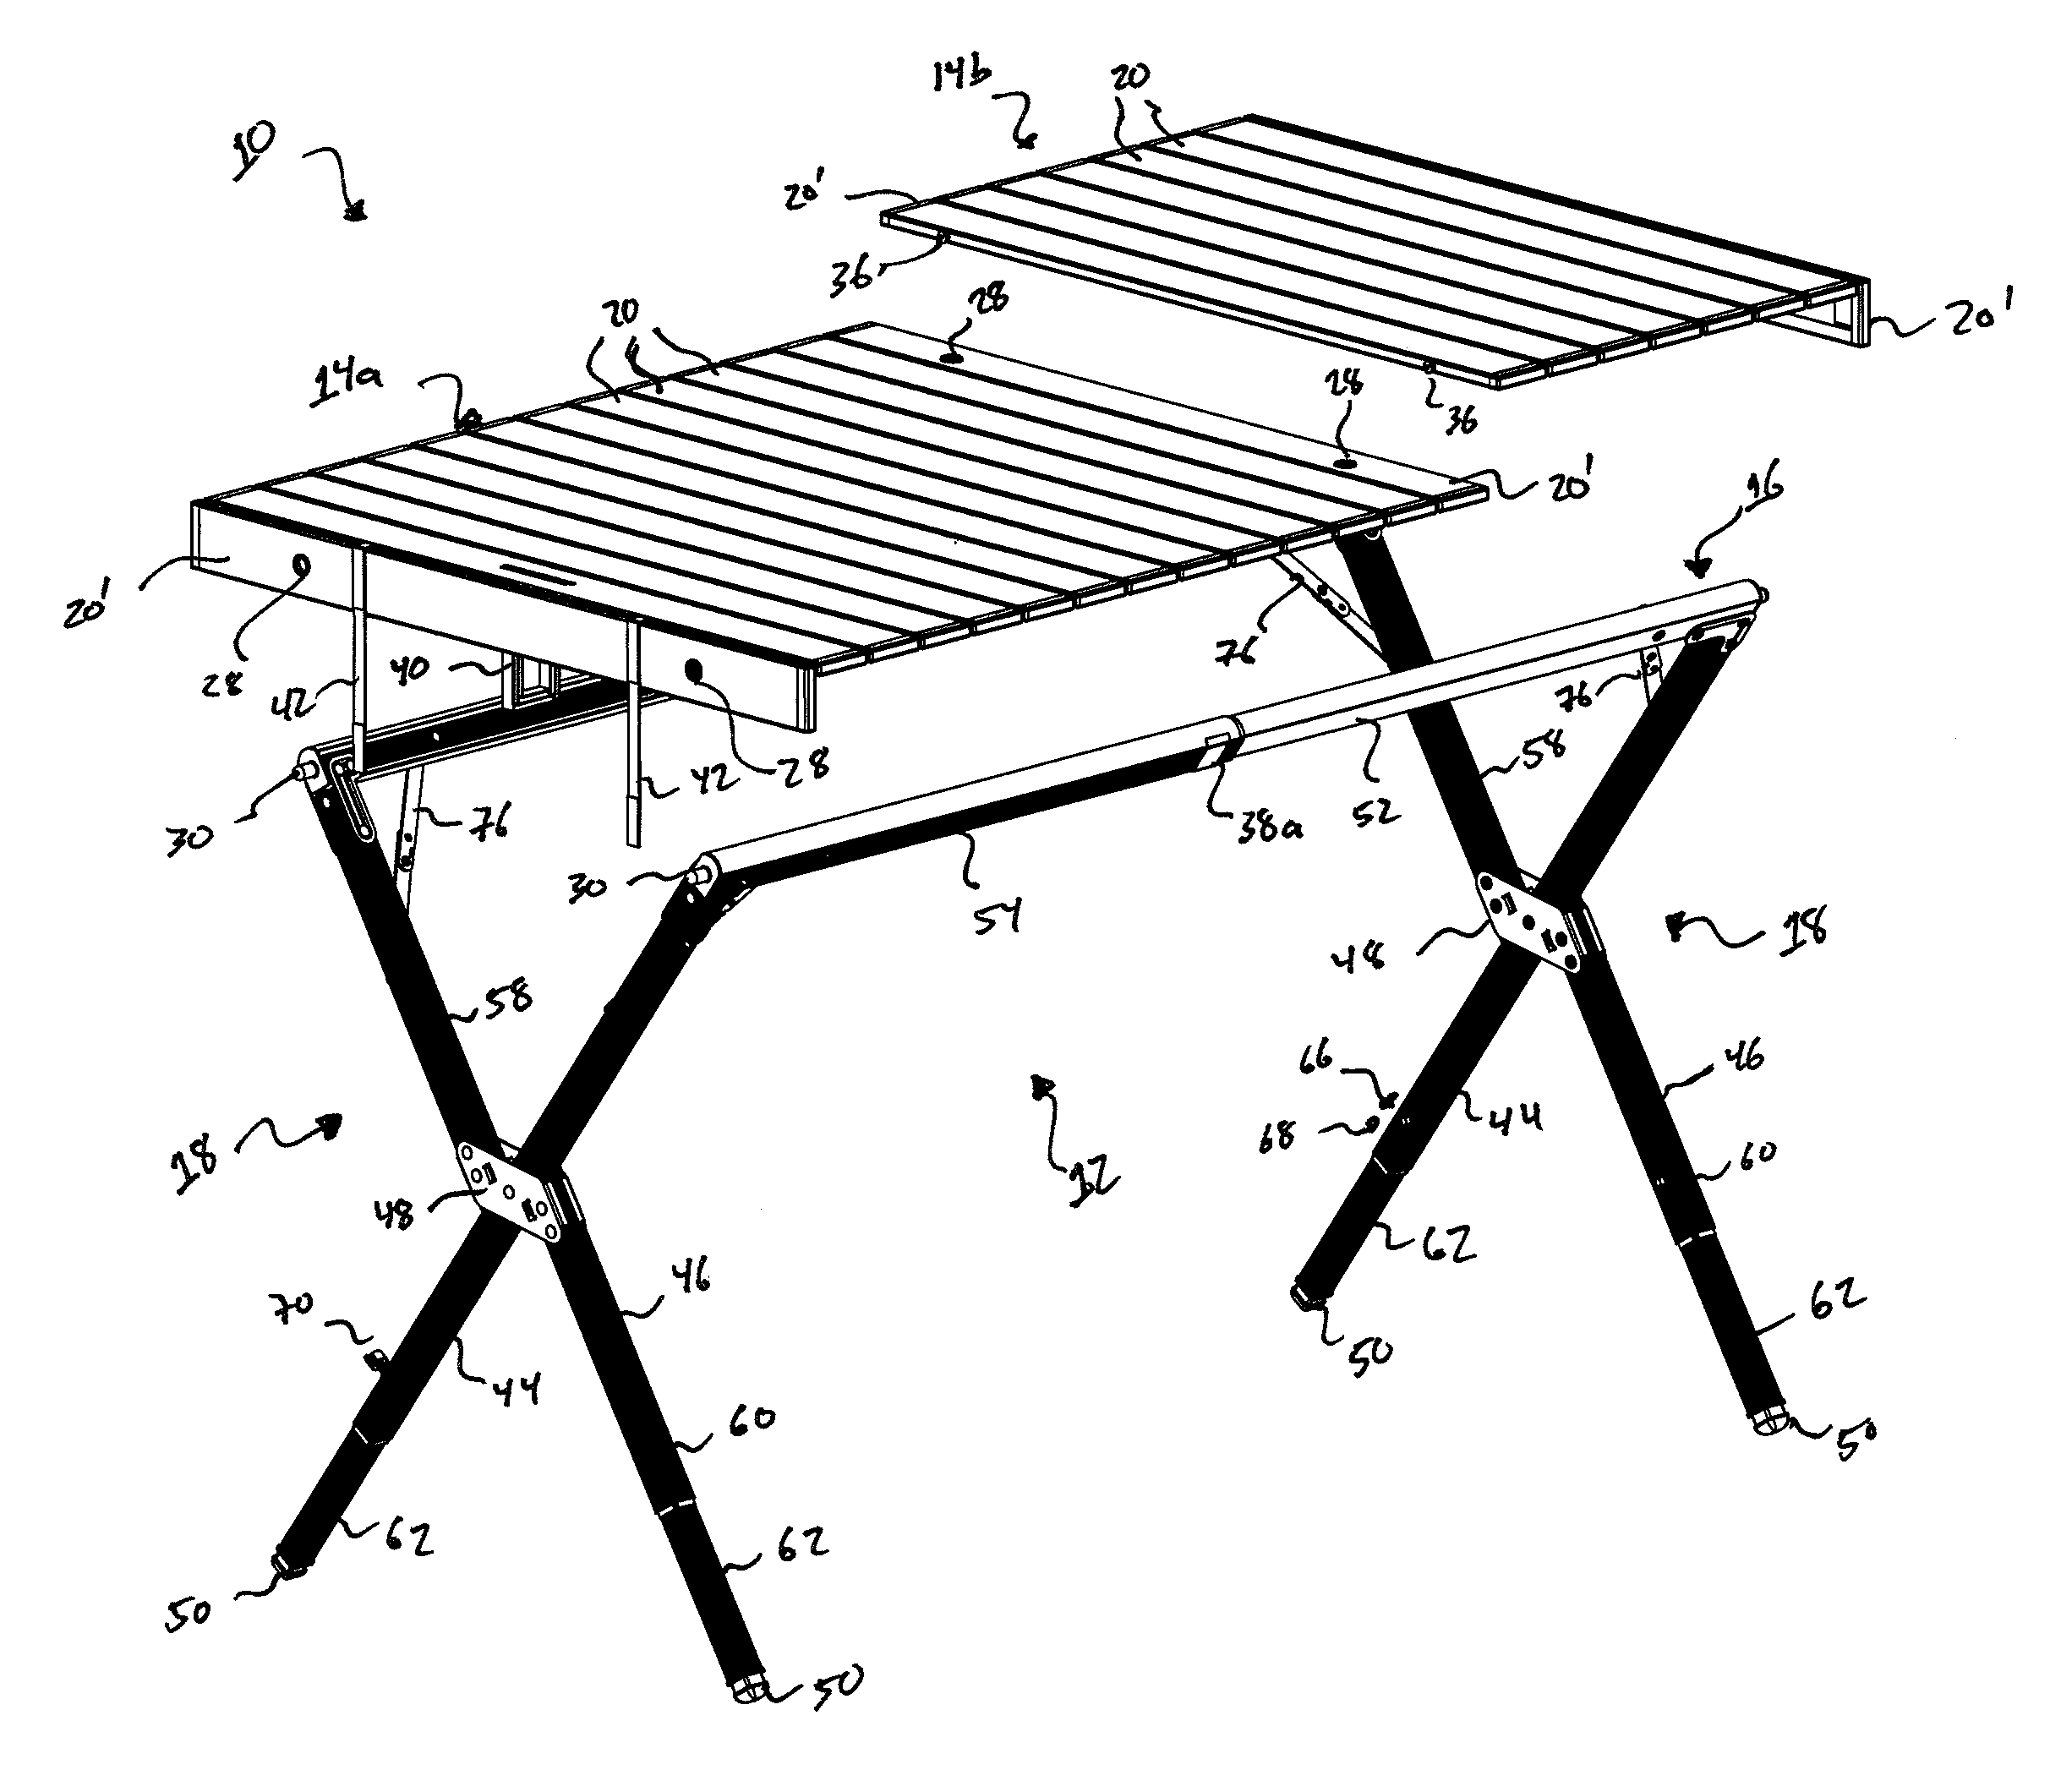 Portable and collapsible table structure